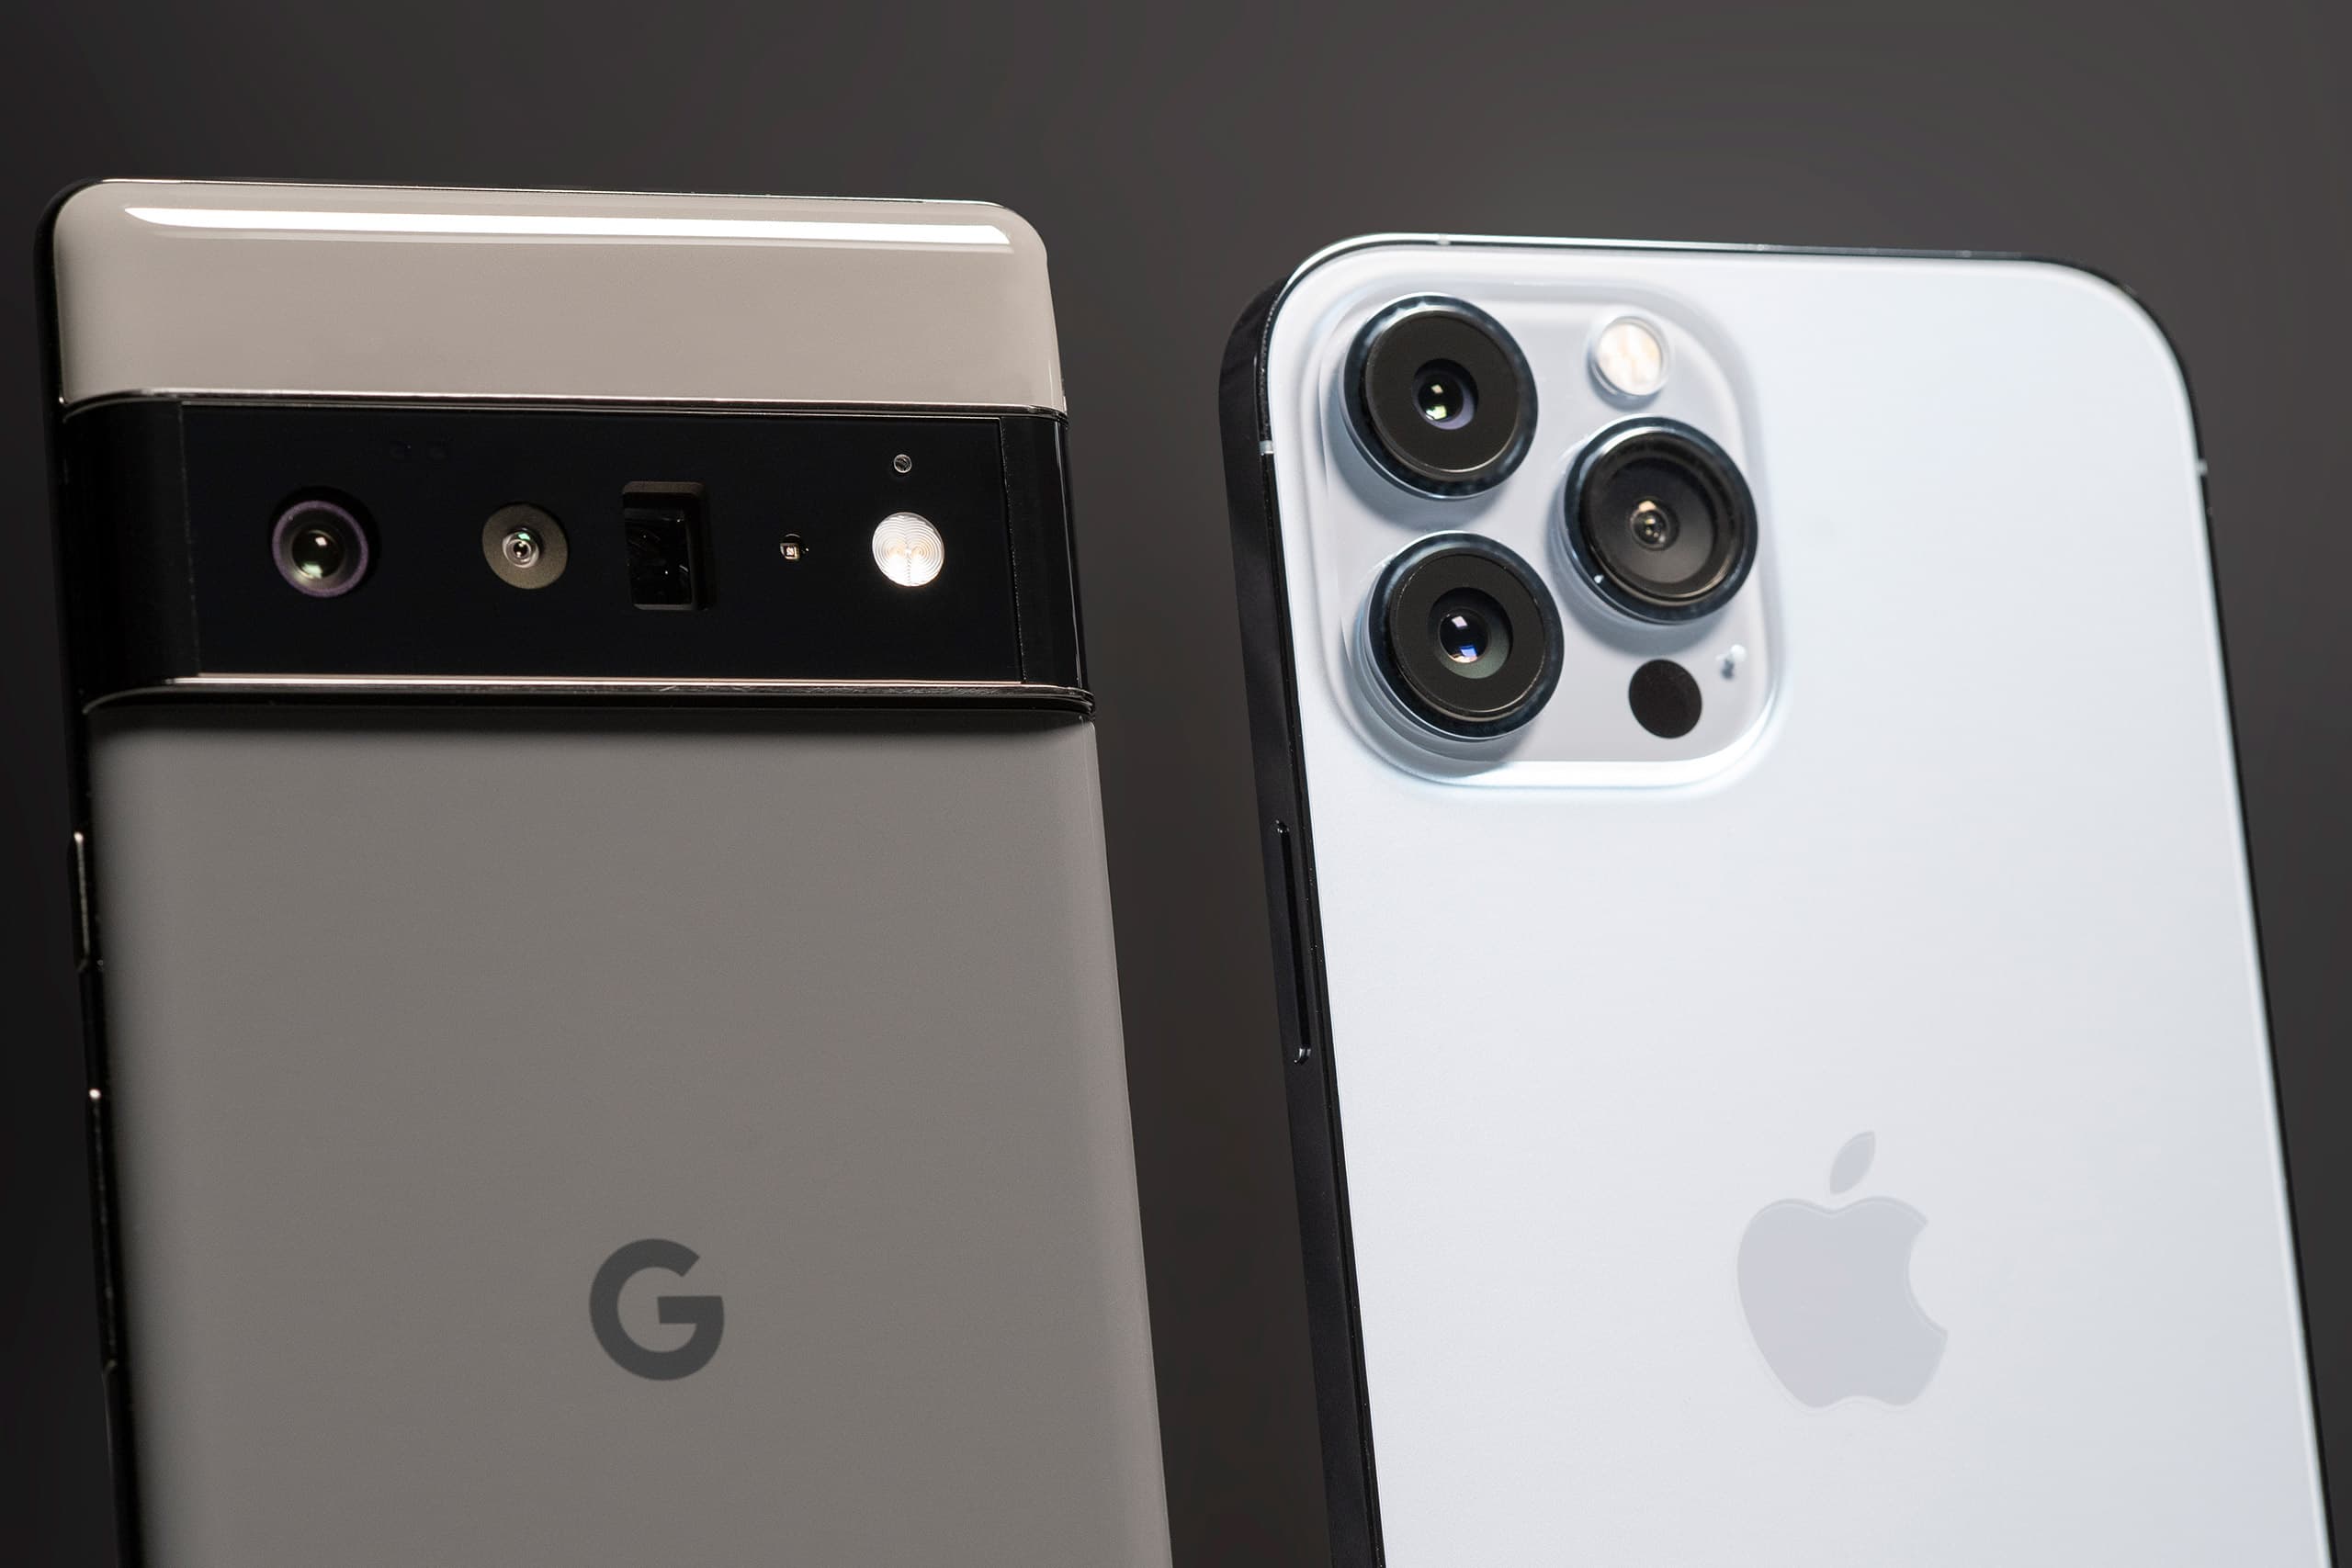 Google Pixel 6 Pro next to the iPhone 13 Pro